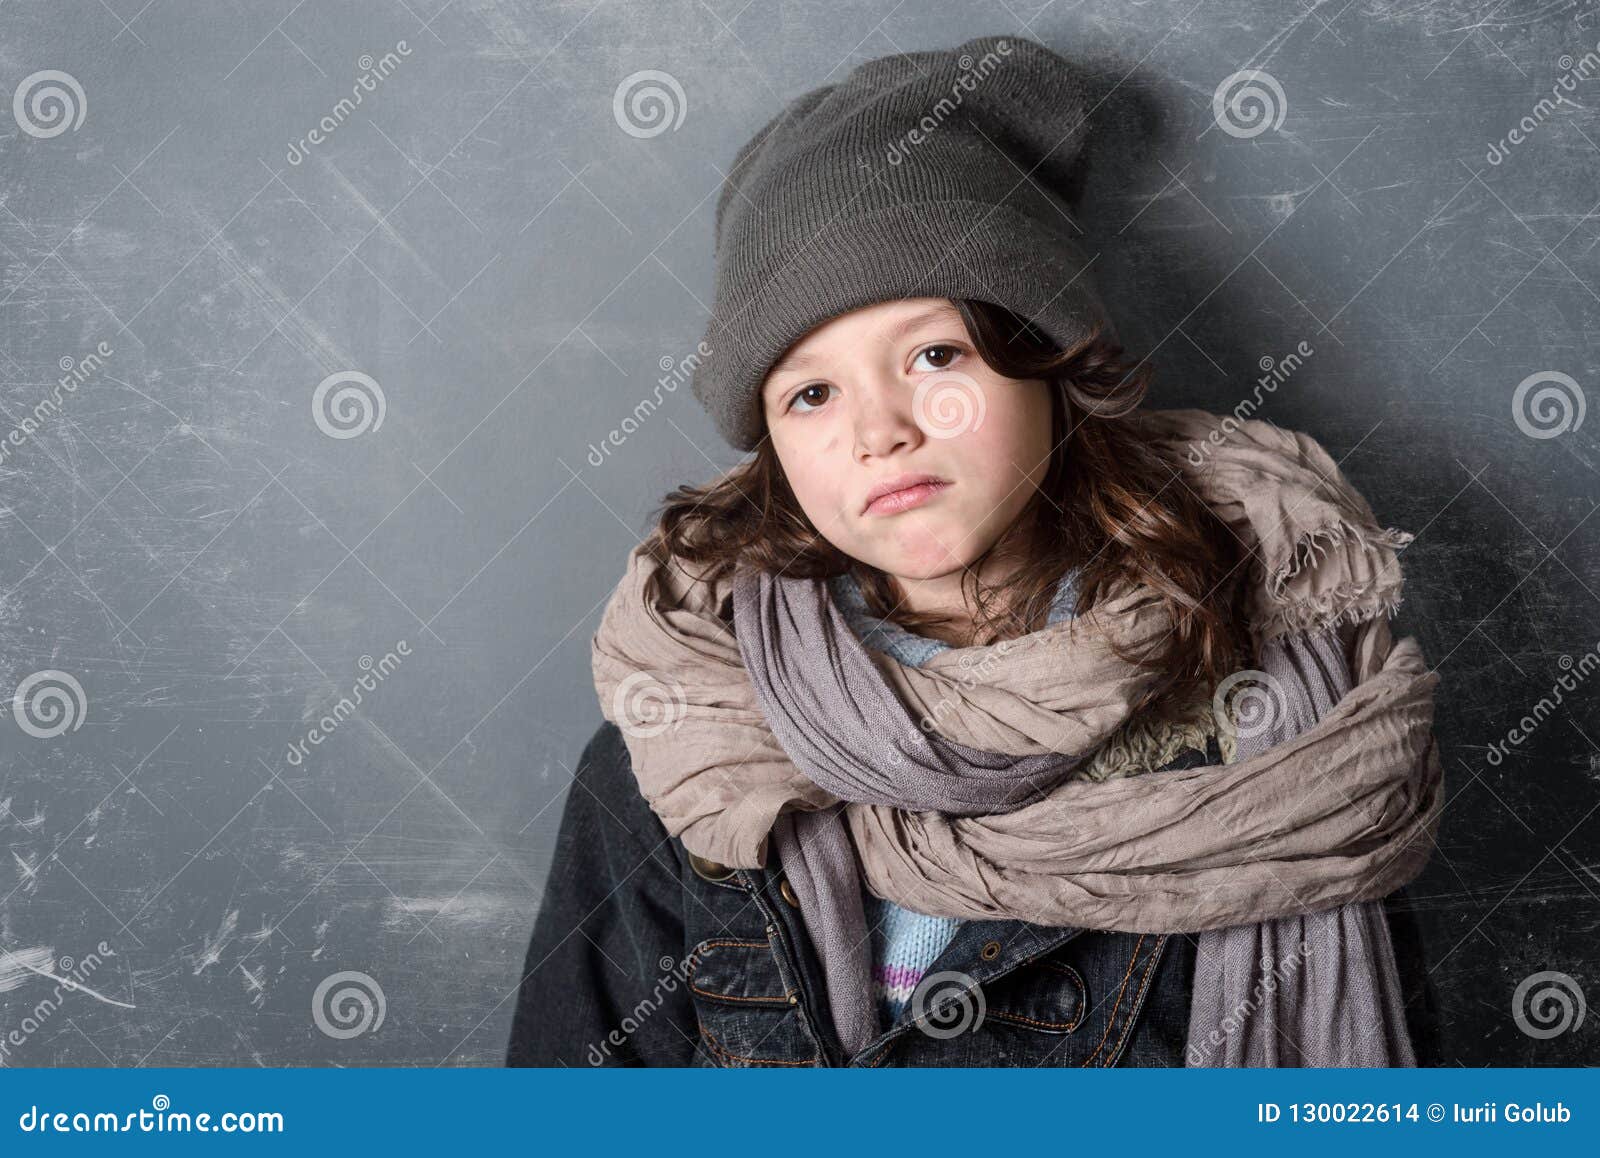 Upset girl with dirty face stock photo. Image of grey - 130022614